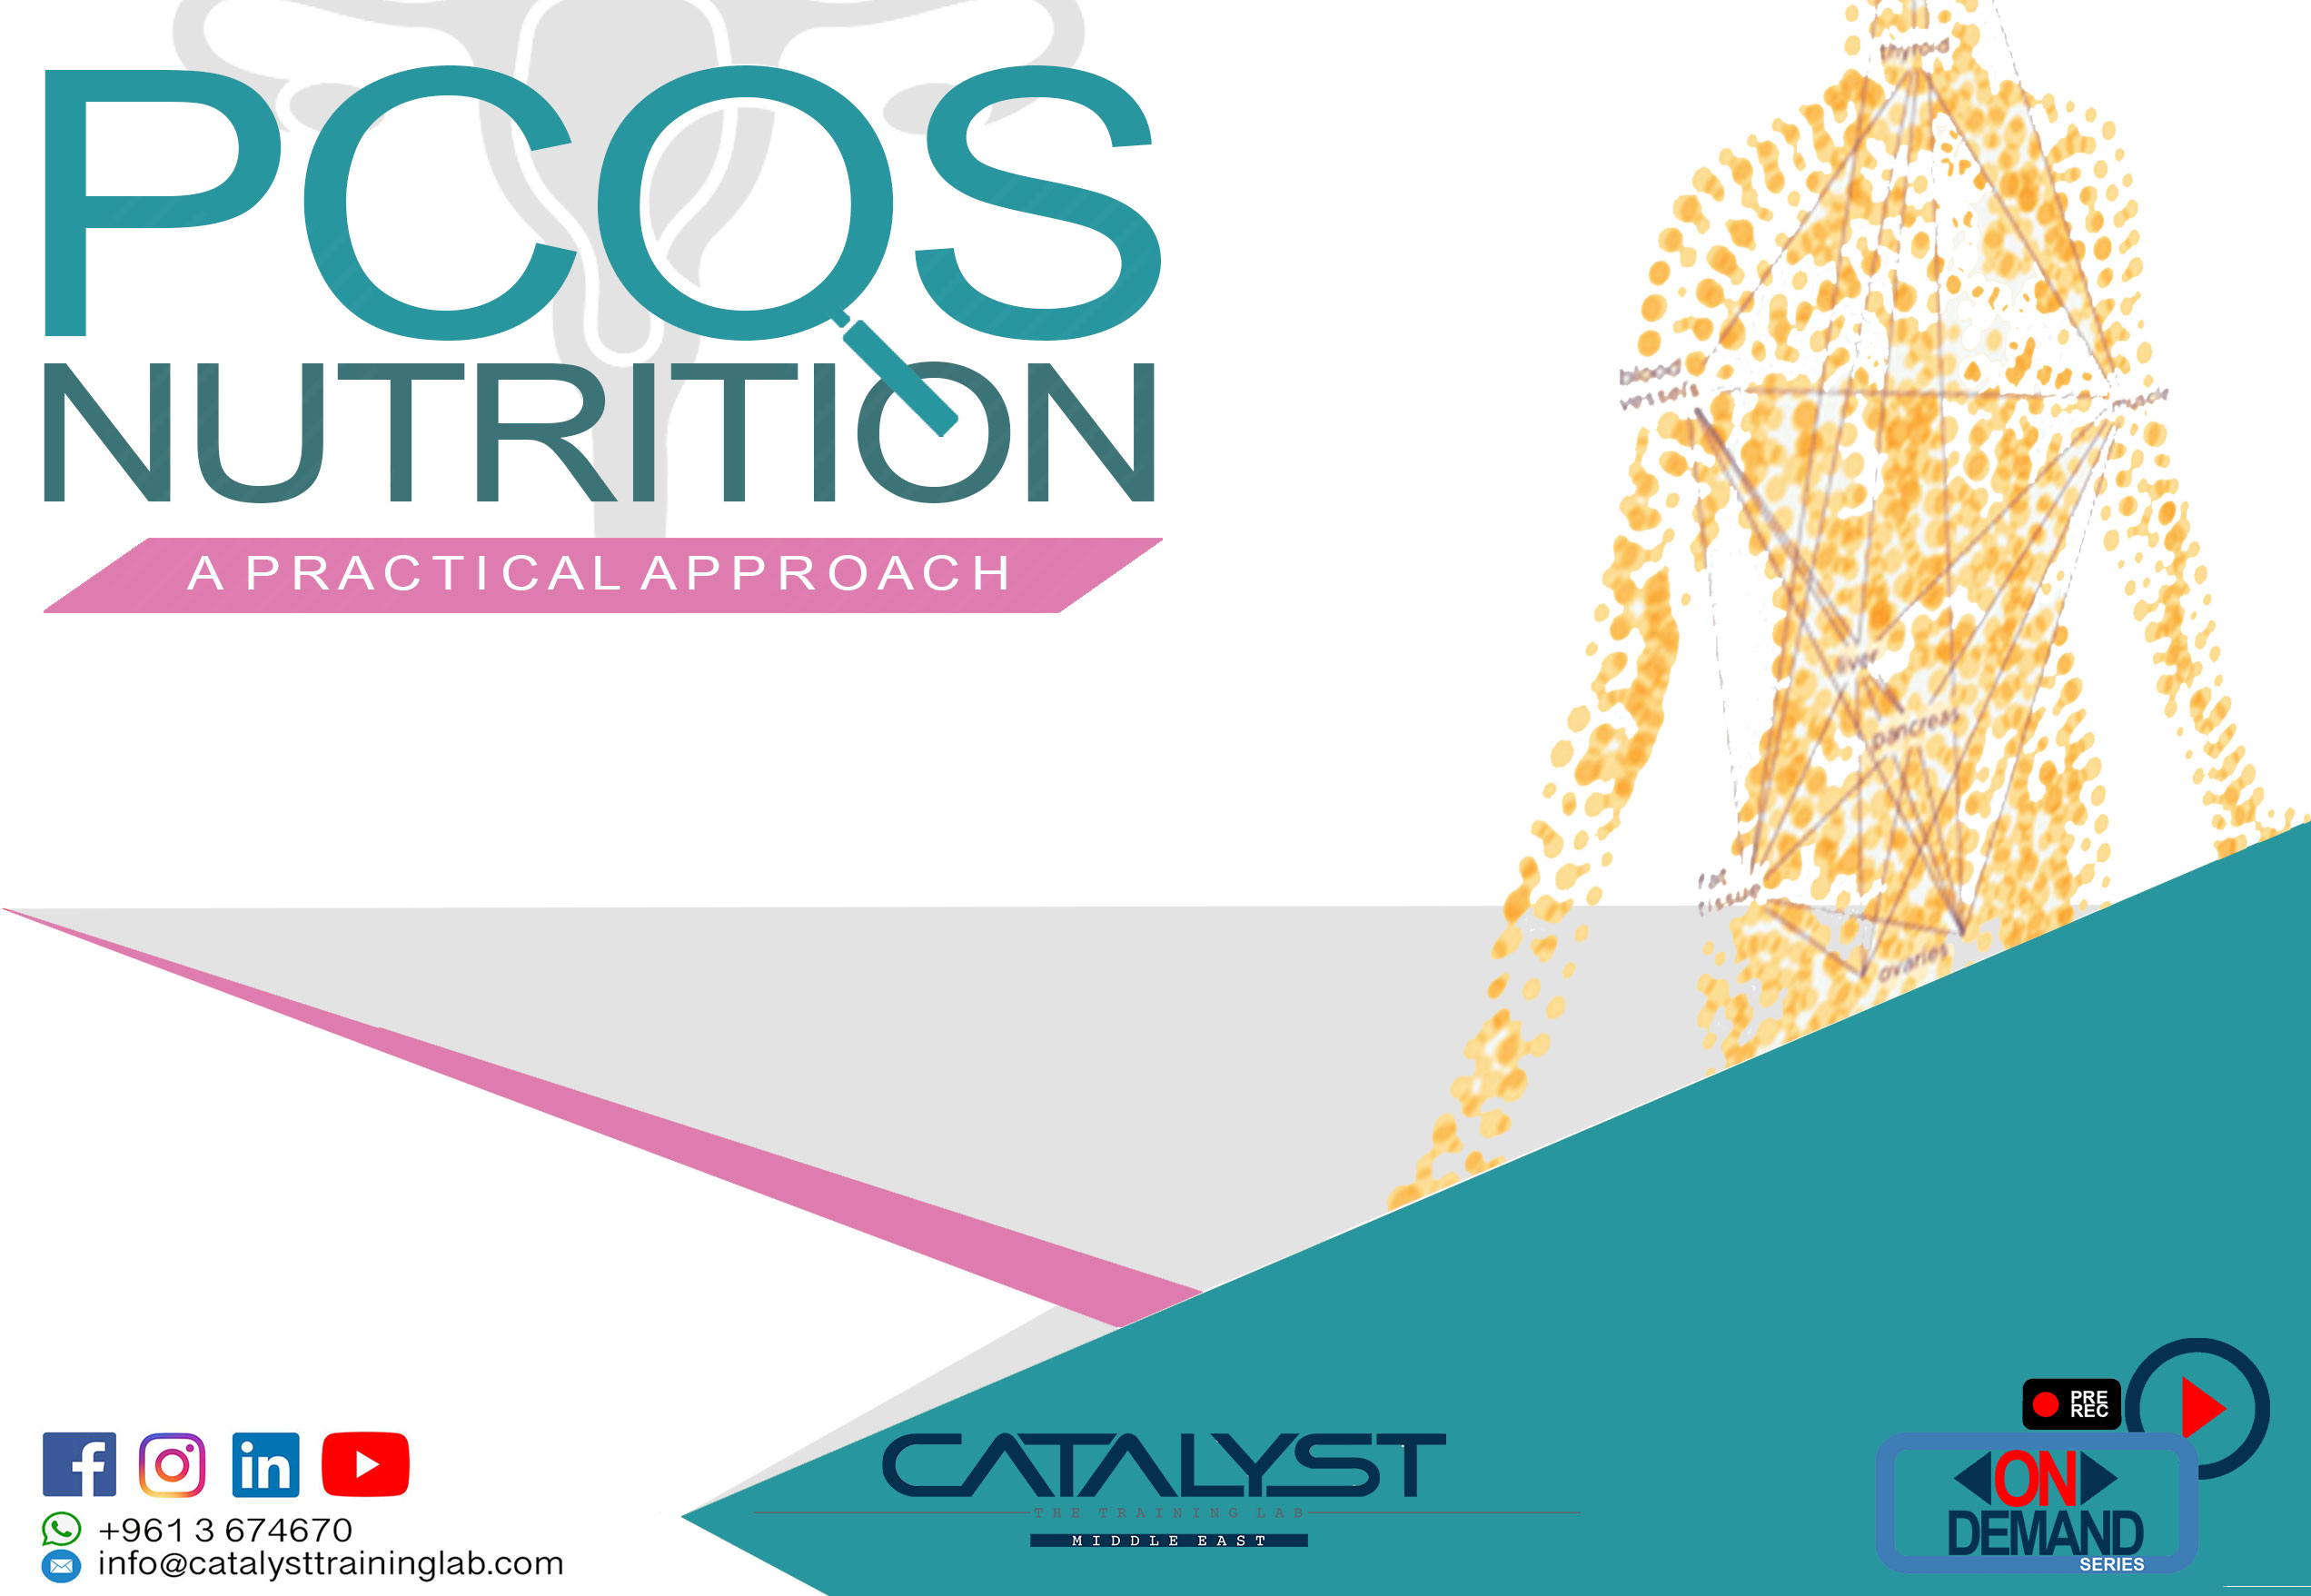 PCOS Nutrition - A Practical Approach